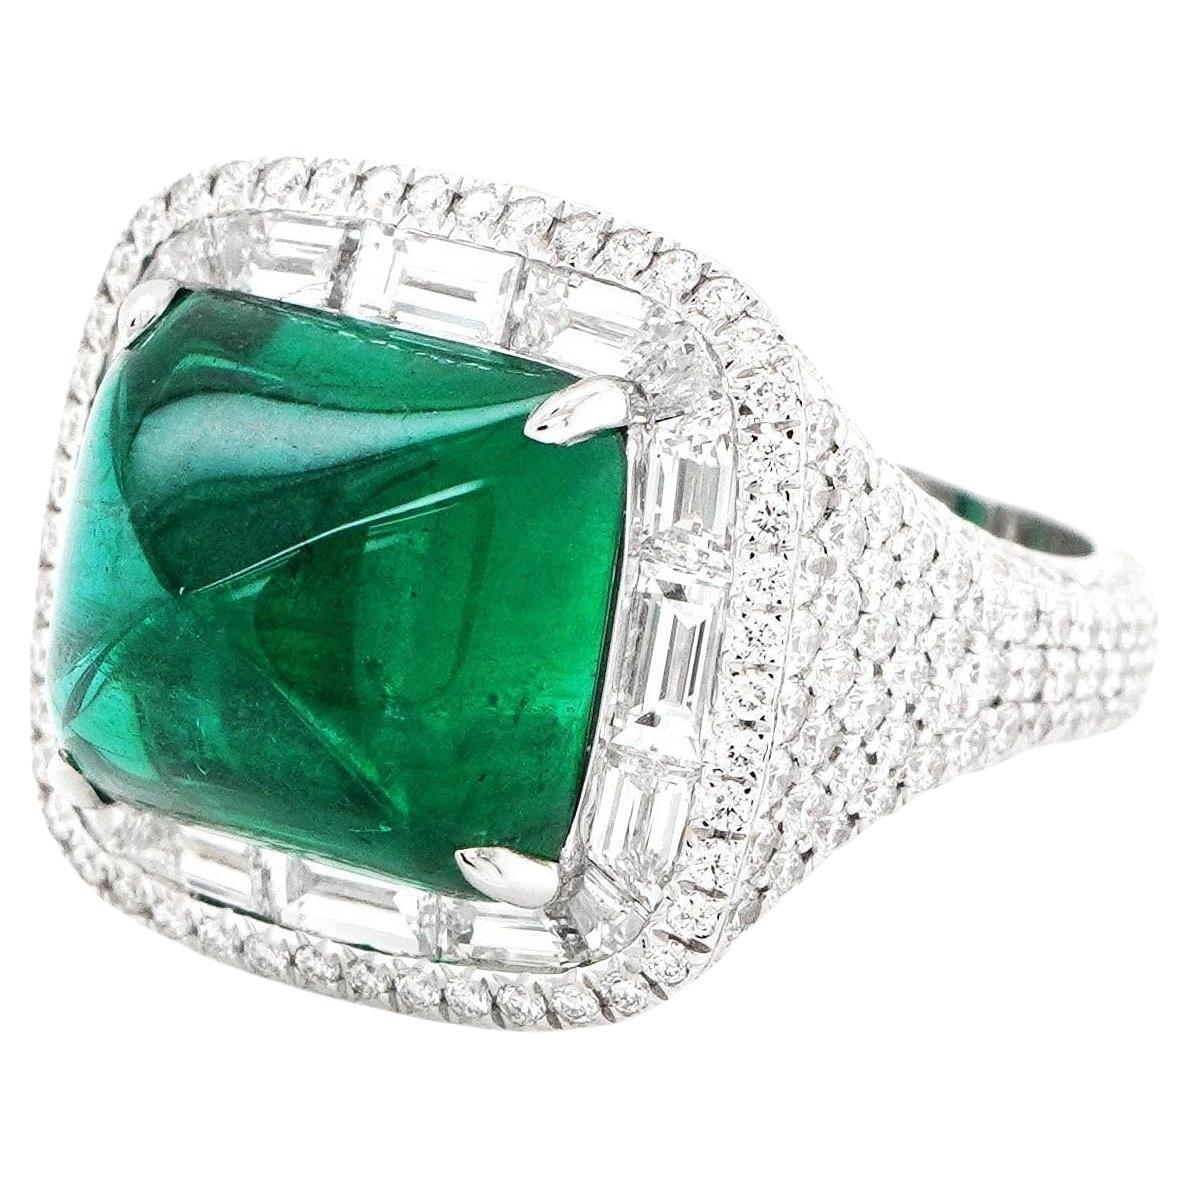 BENJAMIN FINE JEWELRY 7.12 cts Emerald with Diamond 18K Ring For Sale